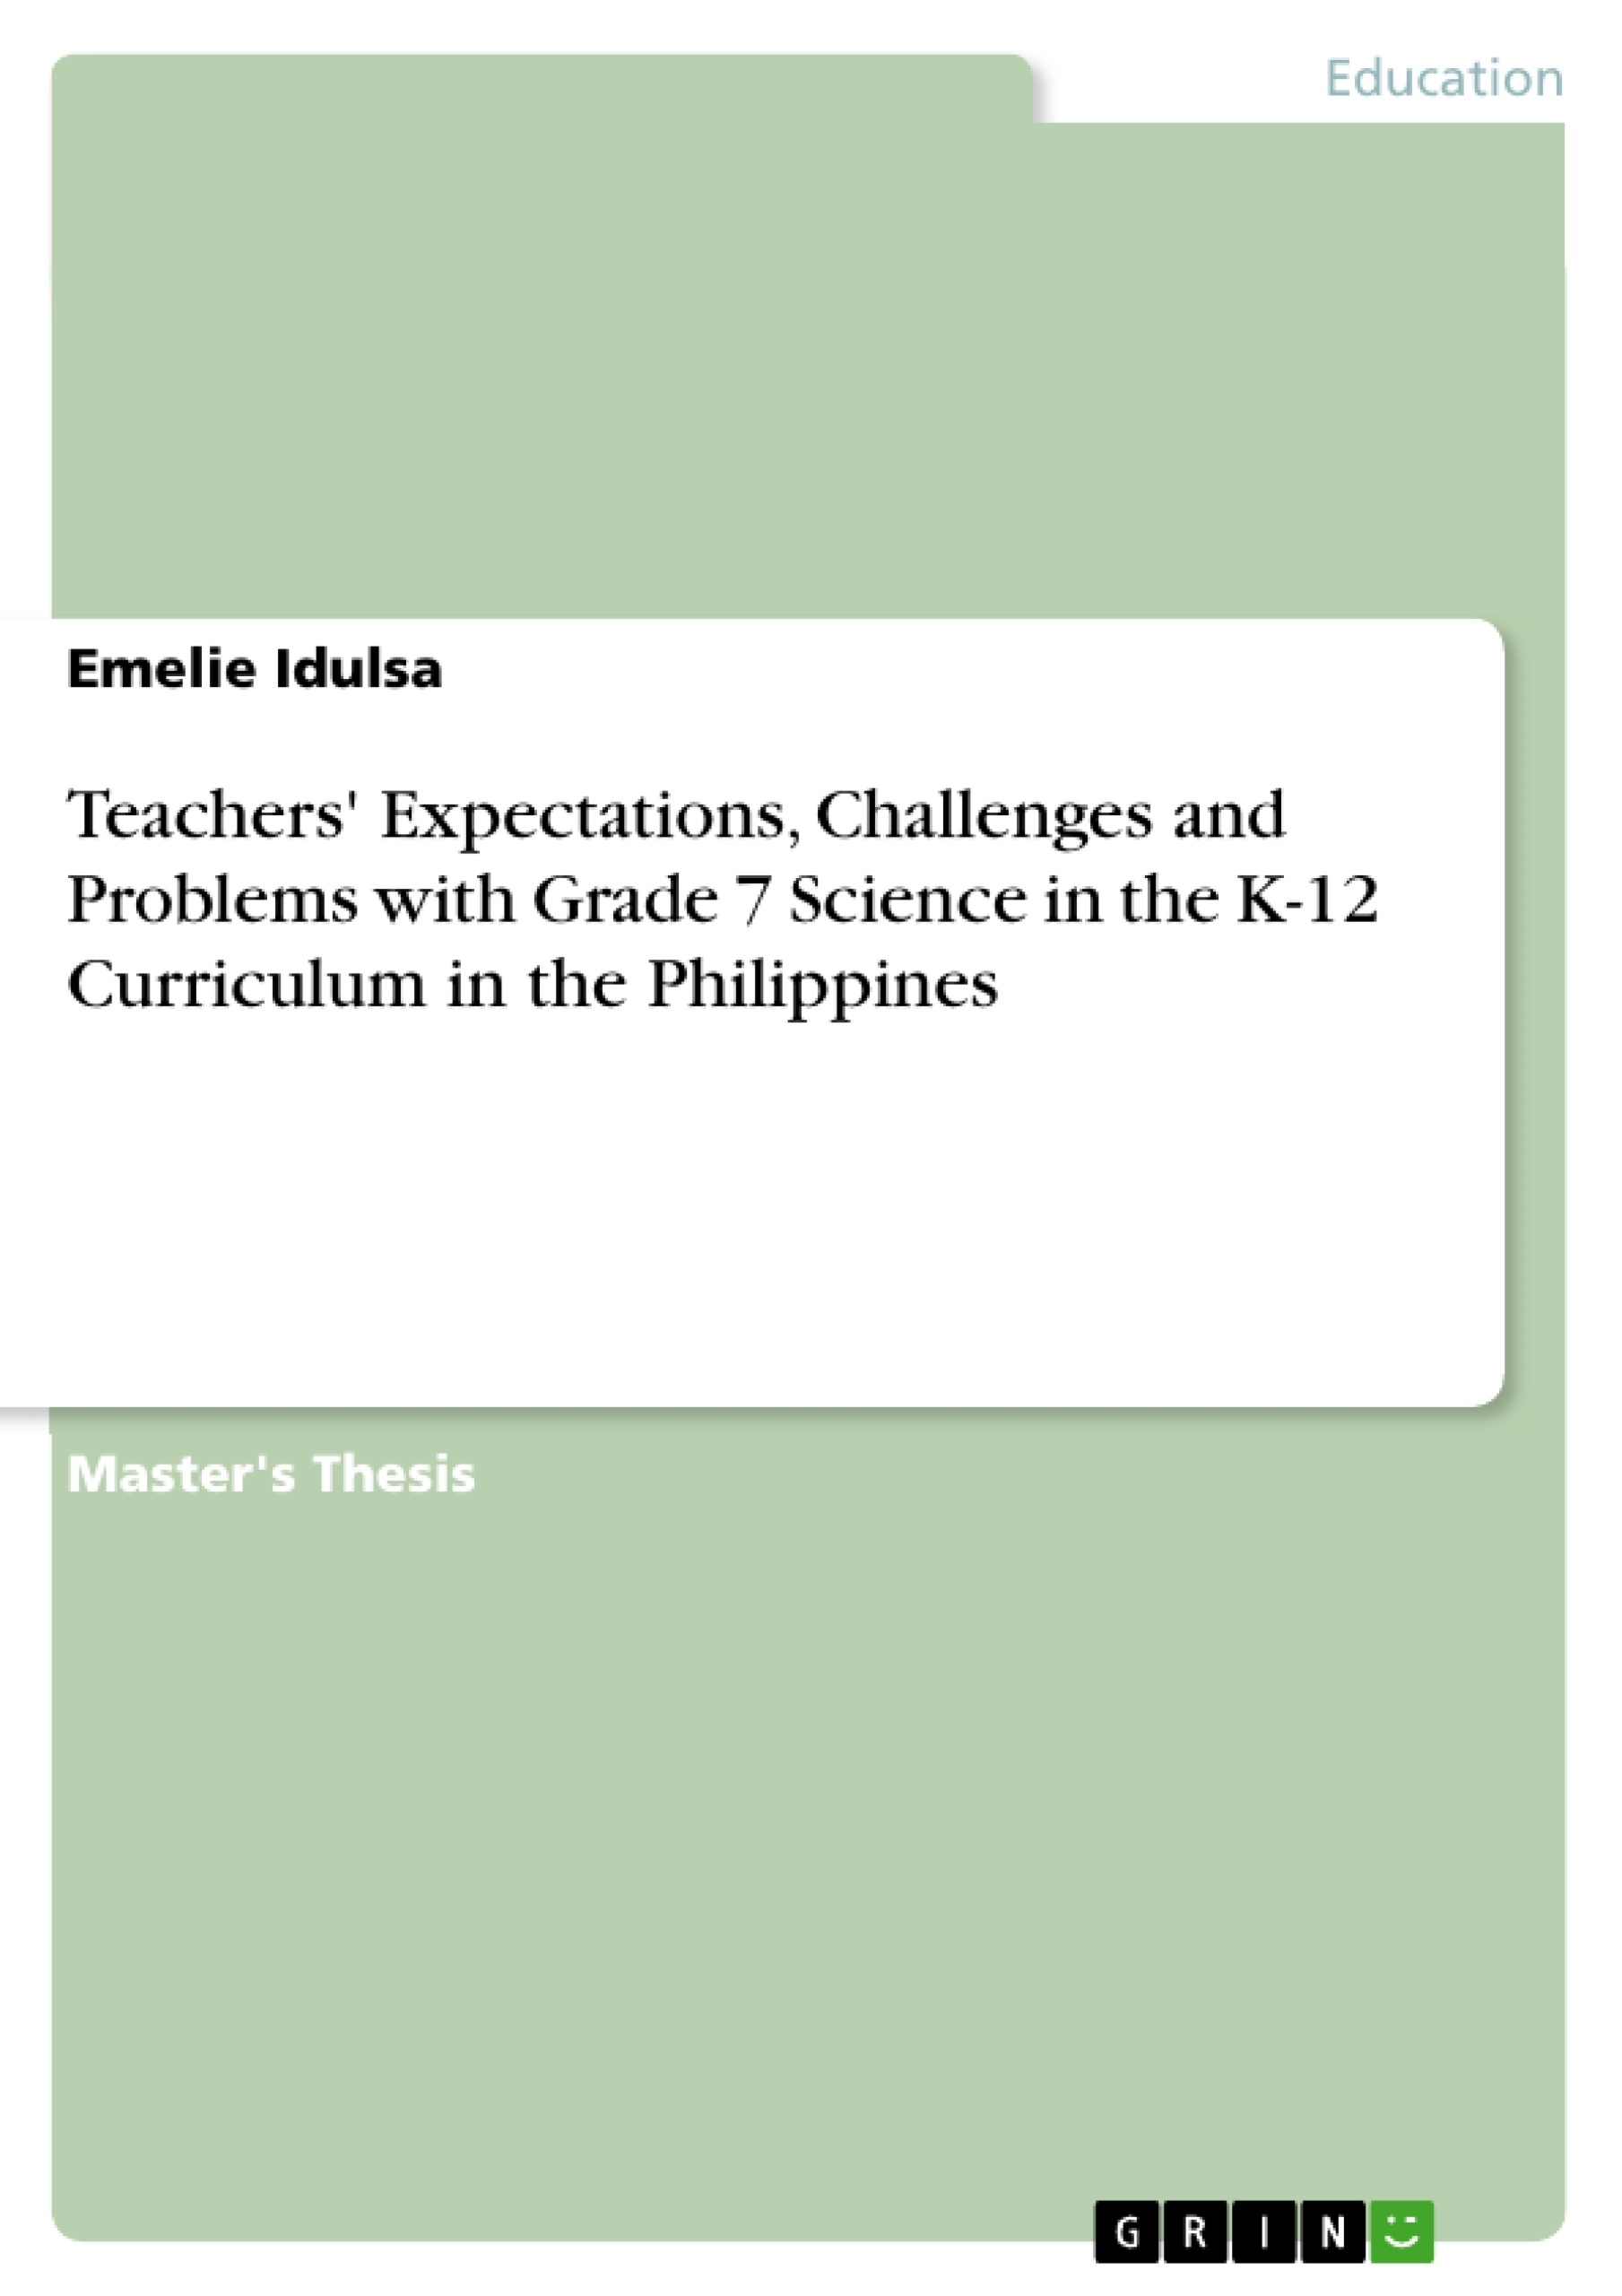 Title: Teachers' Expectations, Challenges and Problems with Grade 7 Science in the K-12 Curriculum in the Philippines